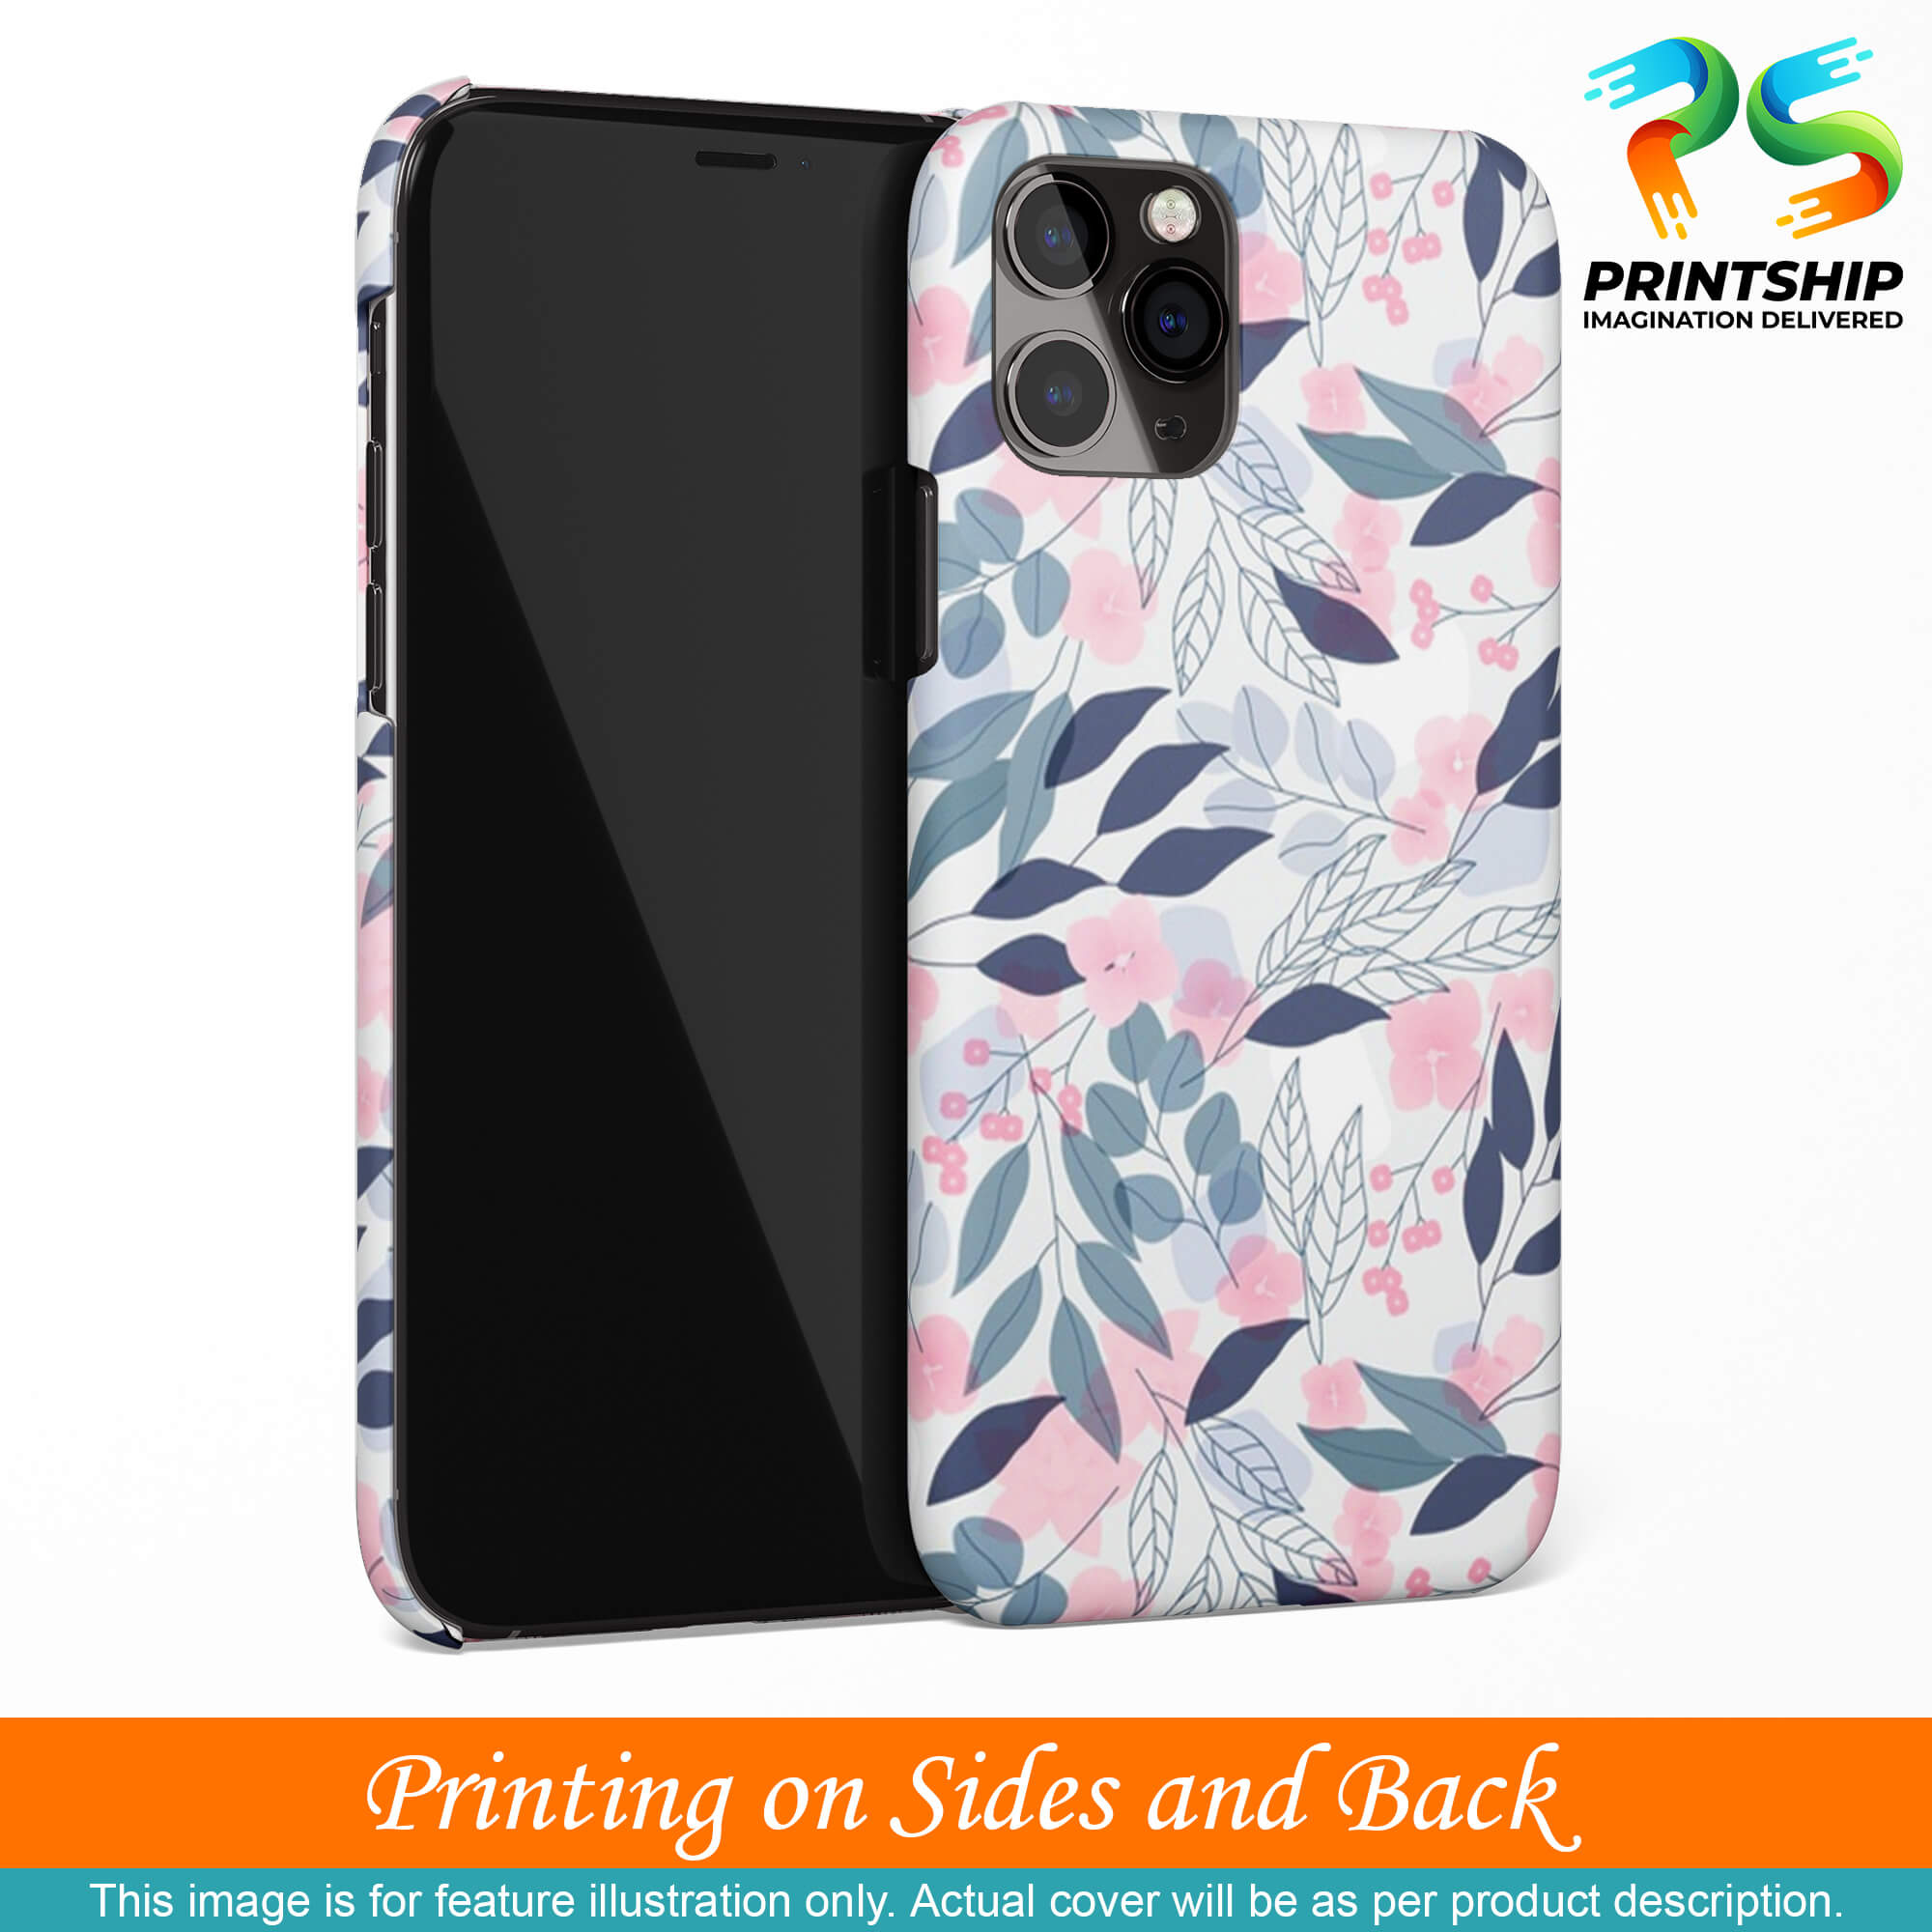 PS1333-Flowery Patterns Back Cover for Apple iPhone 7 Plus-Image3